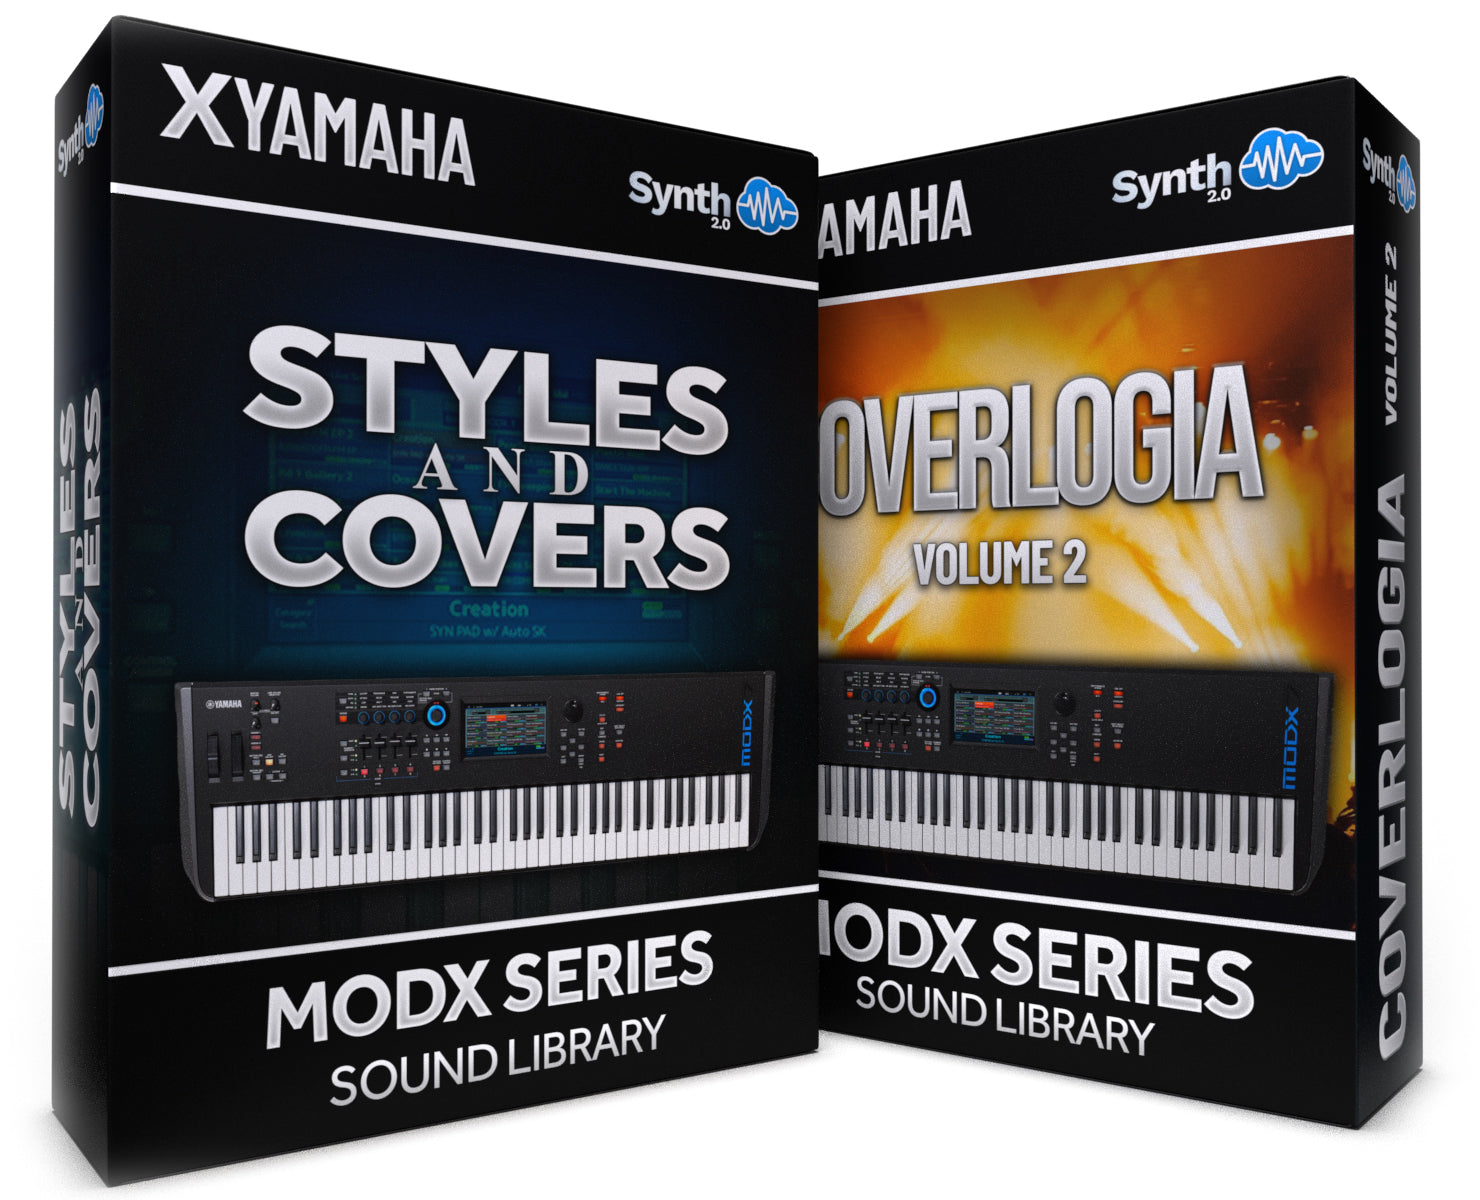 FPL049 - ( Bundle ) - Styles and Covers + Coverlogia Vol.2 - Yamaha MODX / MODX+